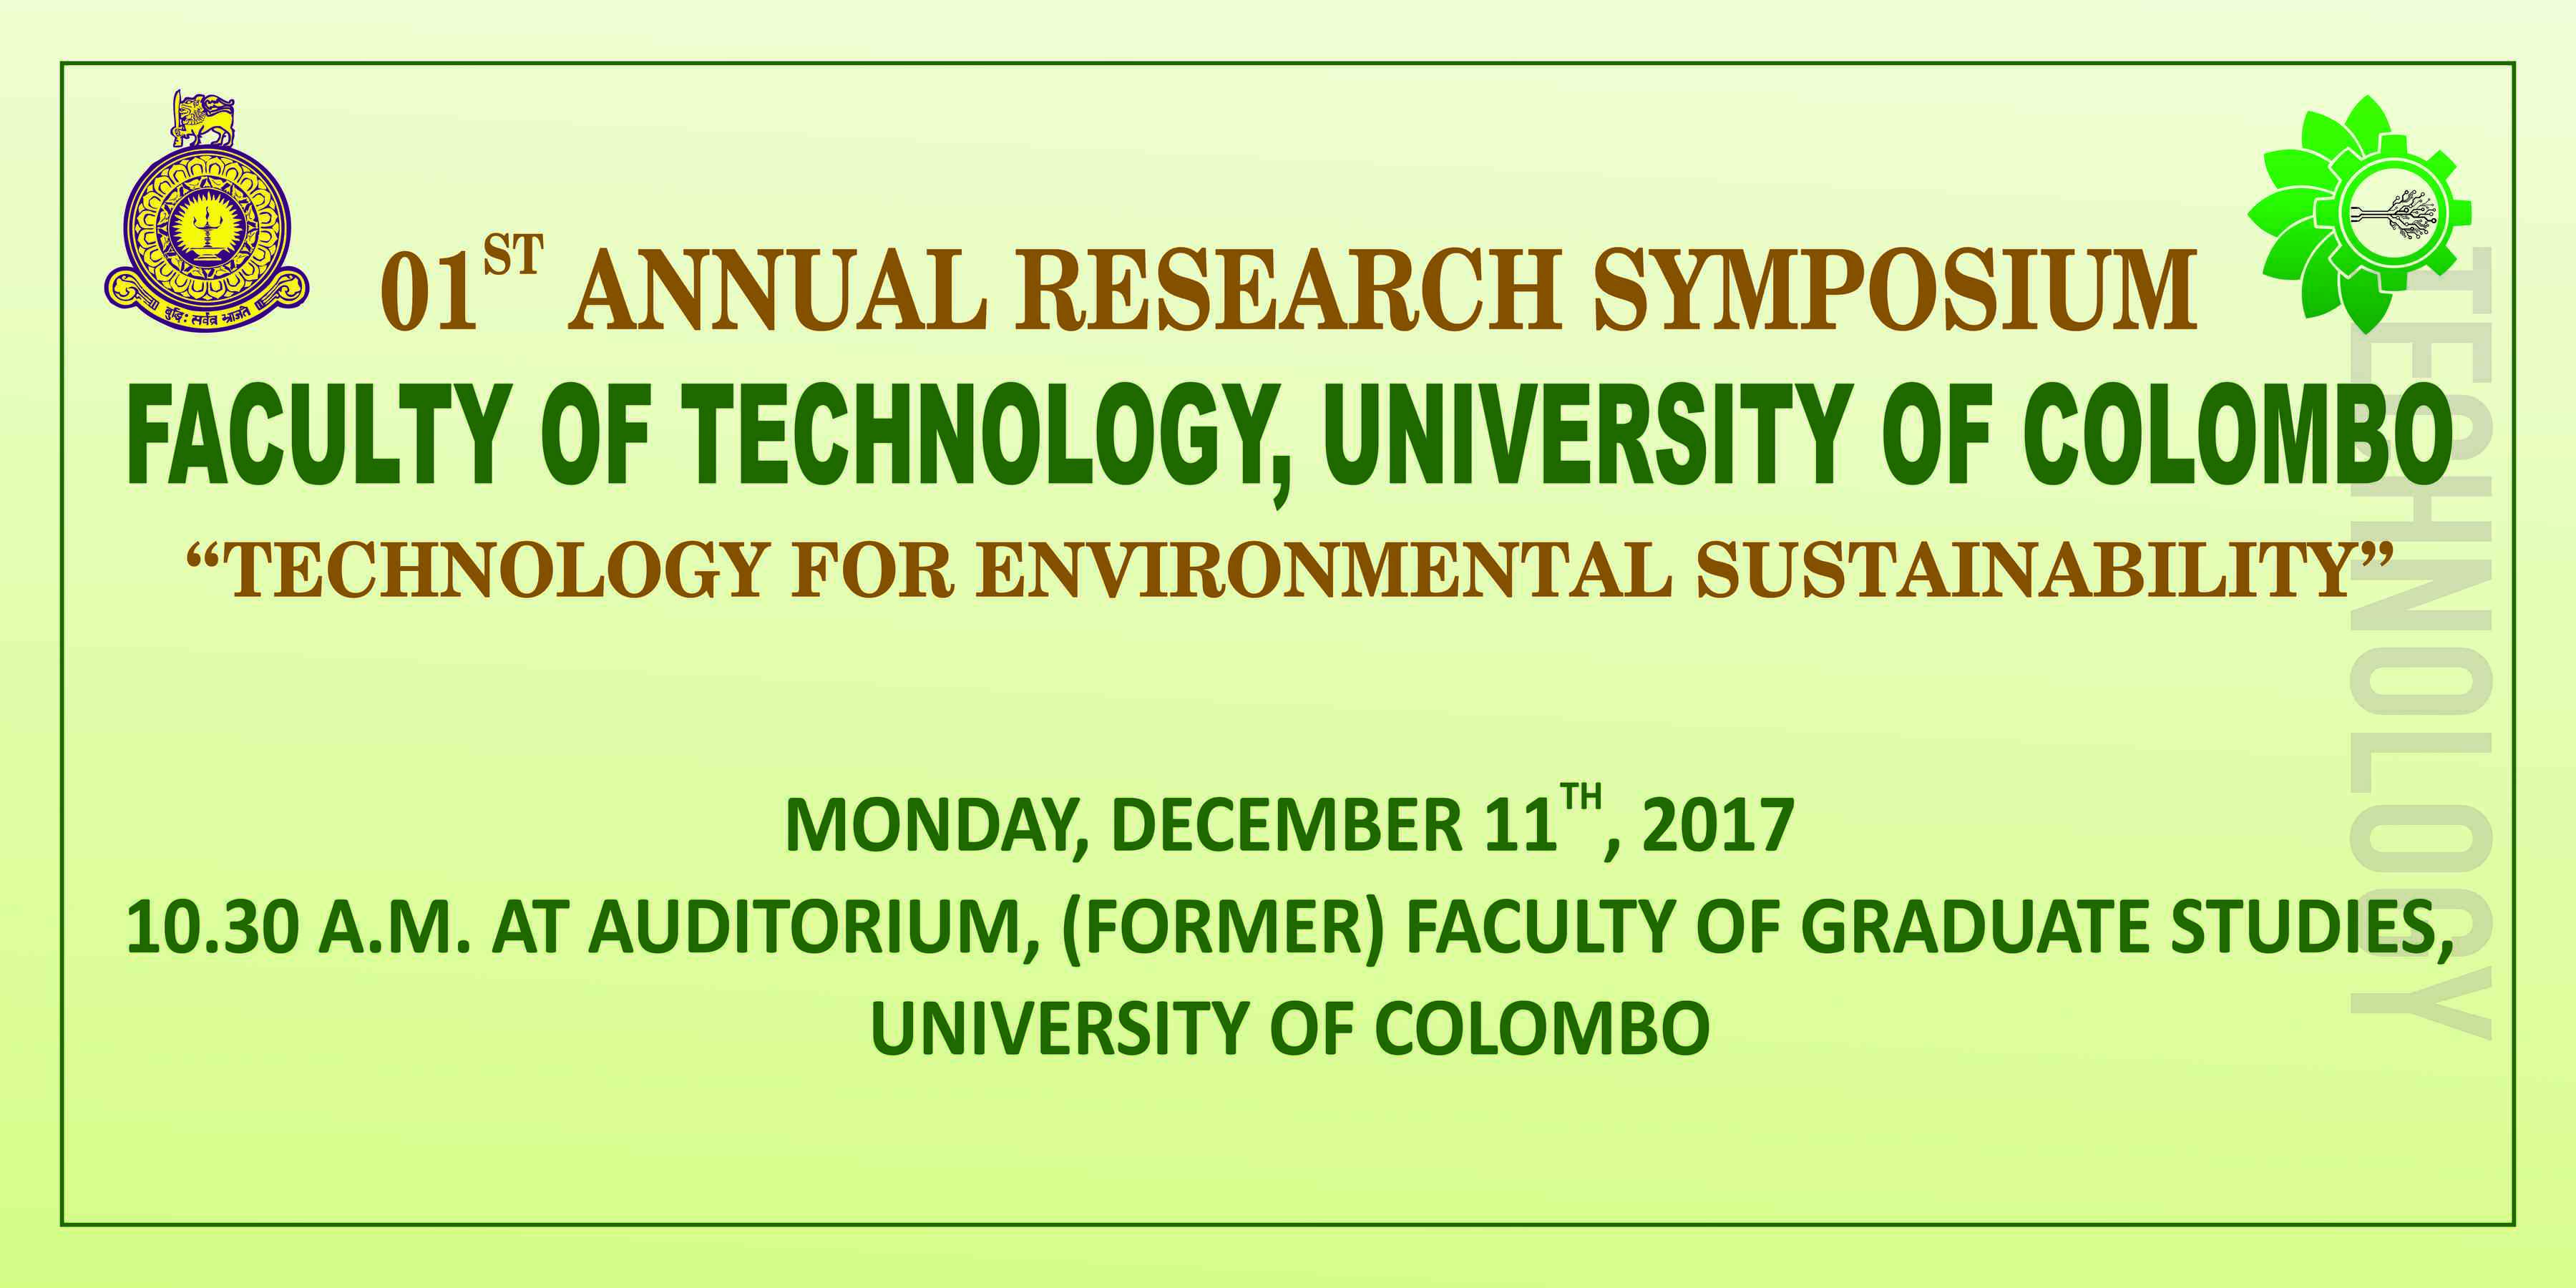 The 1st Annual Research Symposium Faculty of Technology, University of Colombo